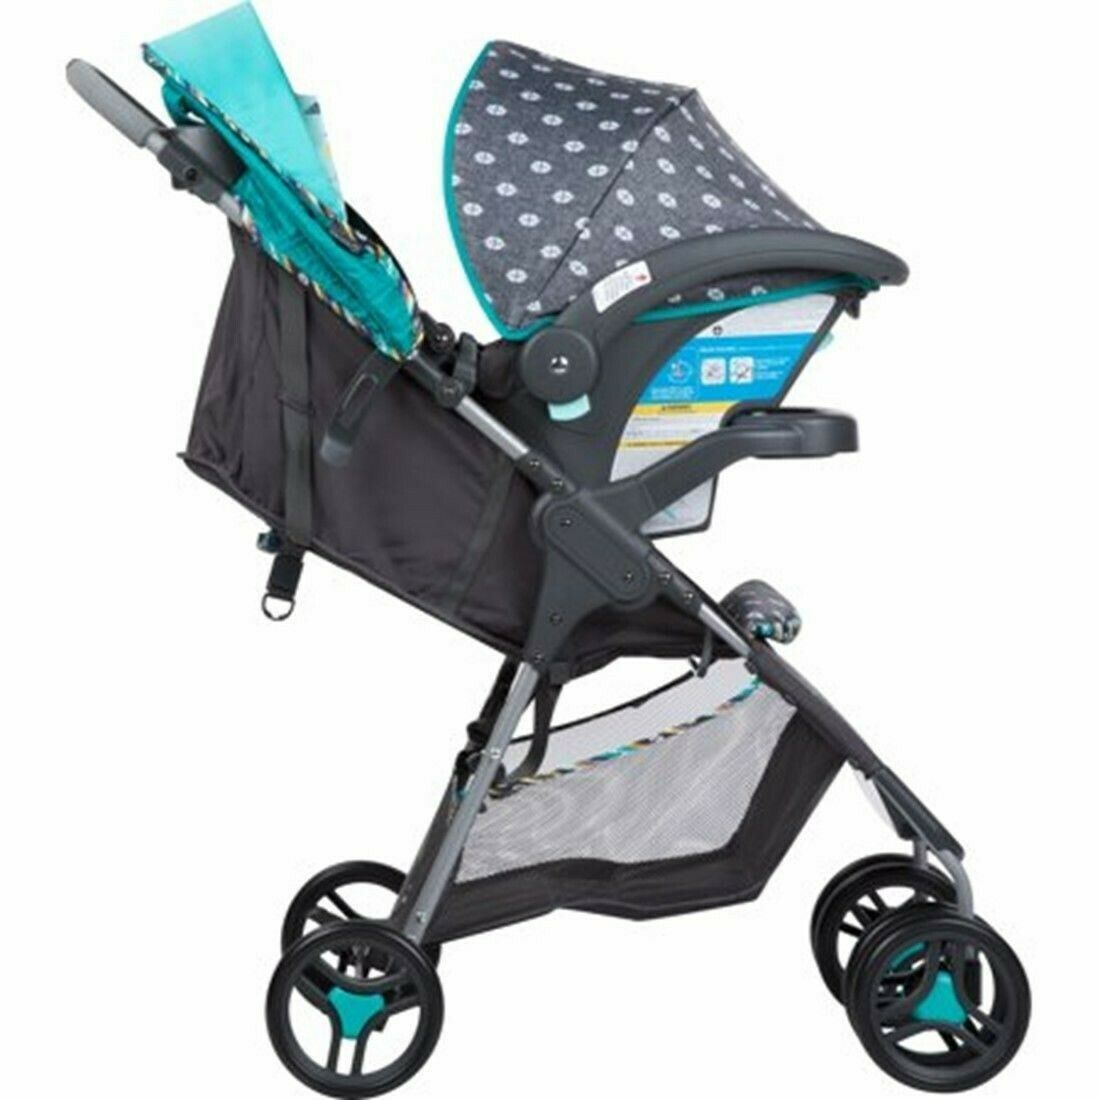 Baby Boy Combo Travel System Set Stroller With Car Seat Playard